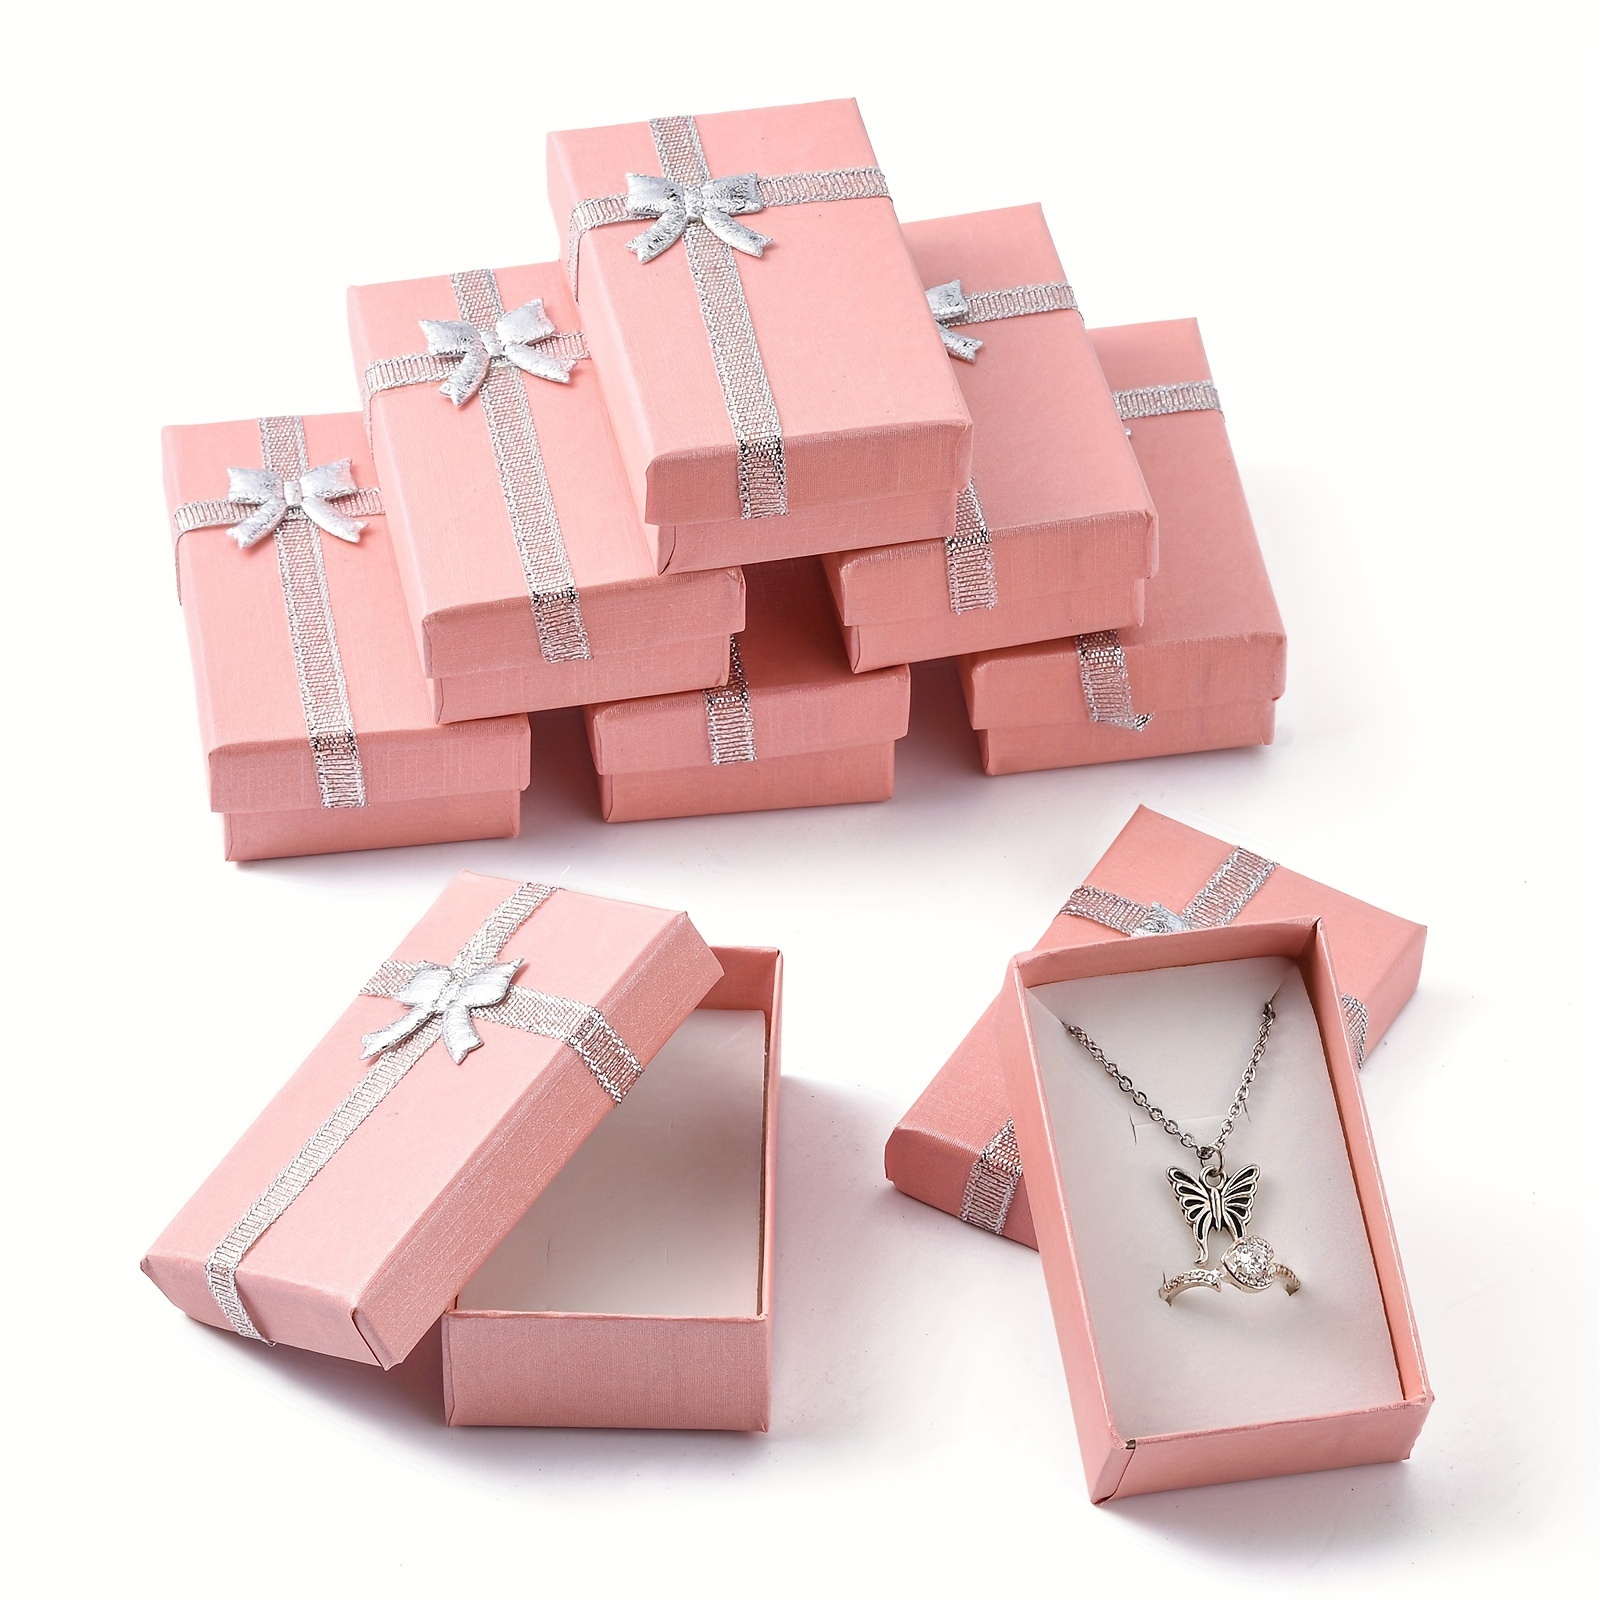 

24pcs Cardboard Jewelry Boxes With Lids & Bows For Valentine's Day Gifts Ring Necklace Bracelet Earrings Display, Elegant Retail Supplies 3.14x1.96x0.98 Inches